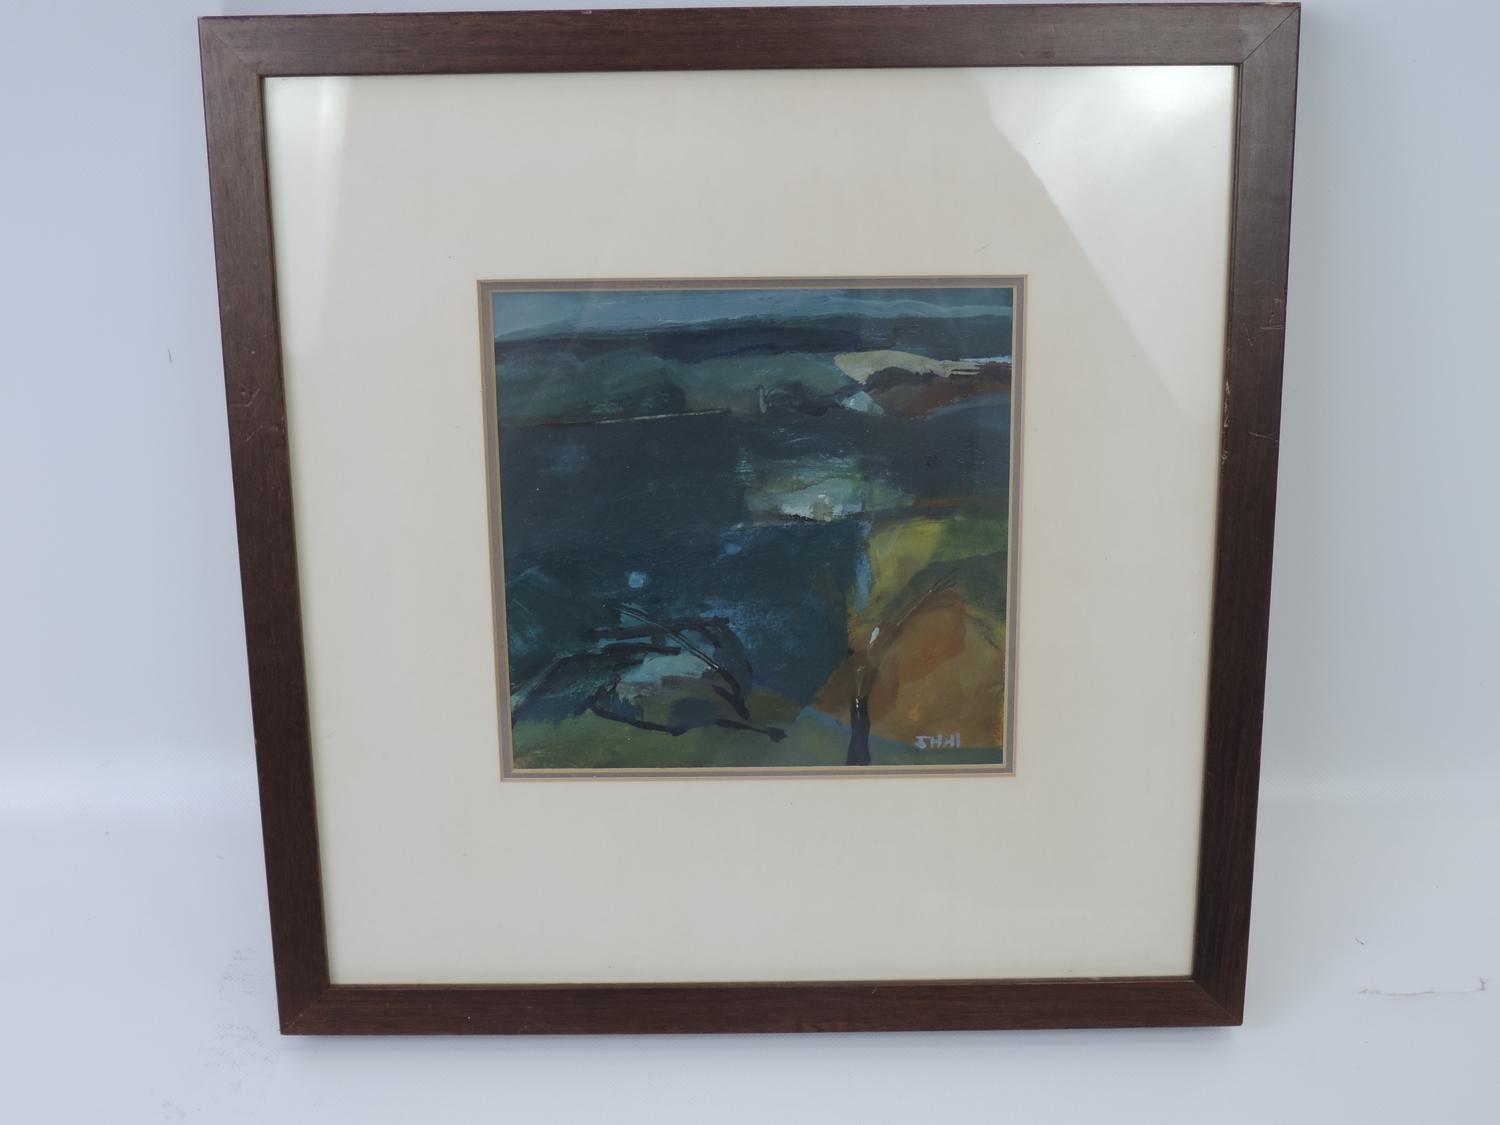 Signed Framed Watercolour Painting - Rock Lines by John Hall - Visible Picture 7" x 7"